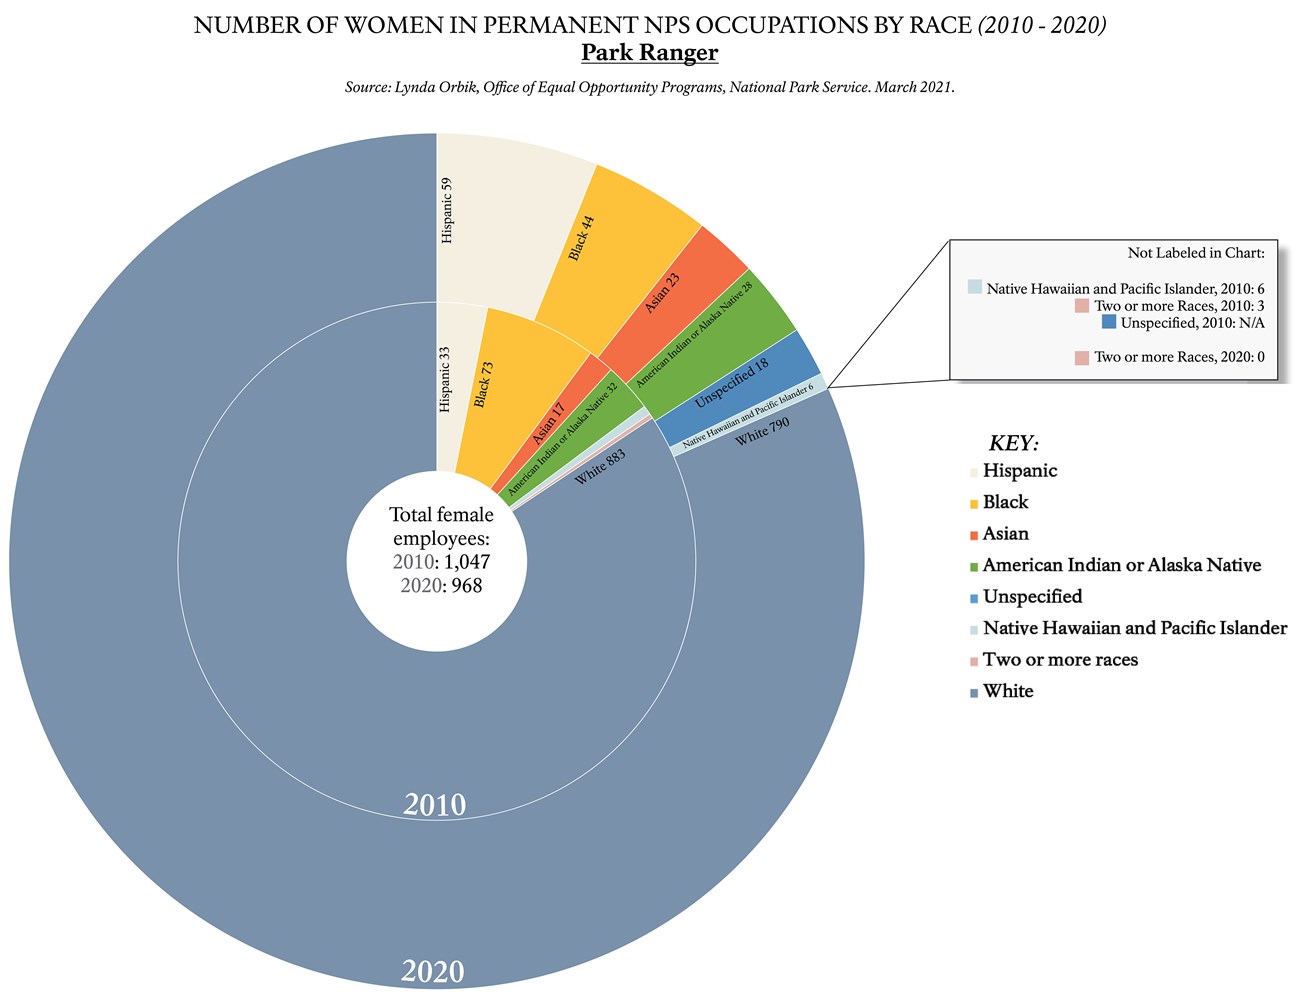 Pie Chart representing the number of women with permanent park ranger positions by race (2010-2020).